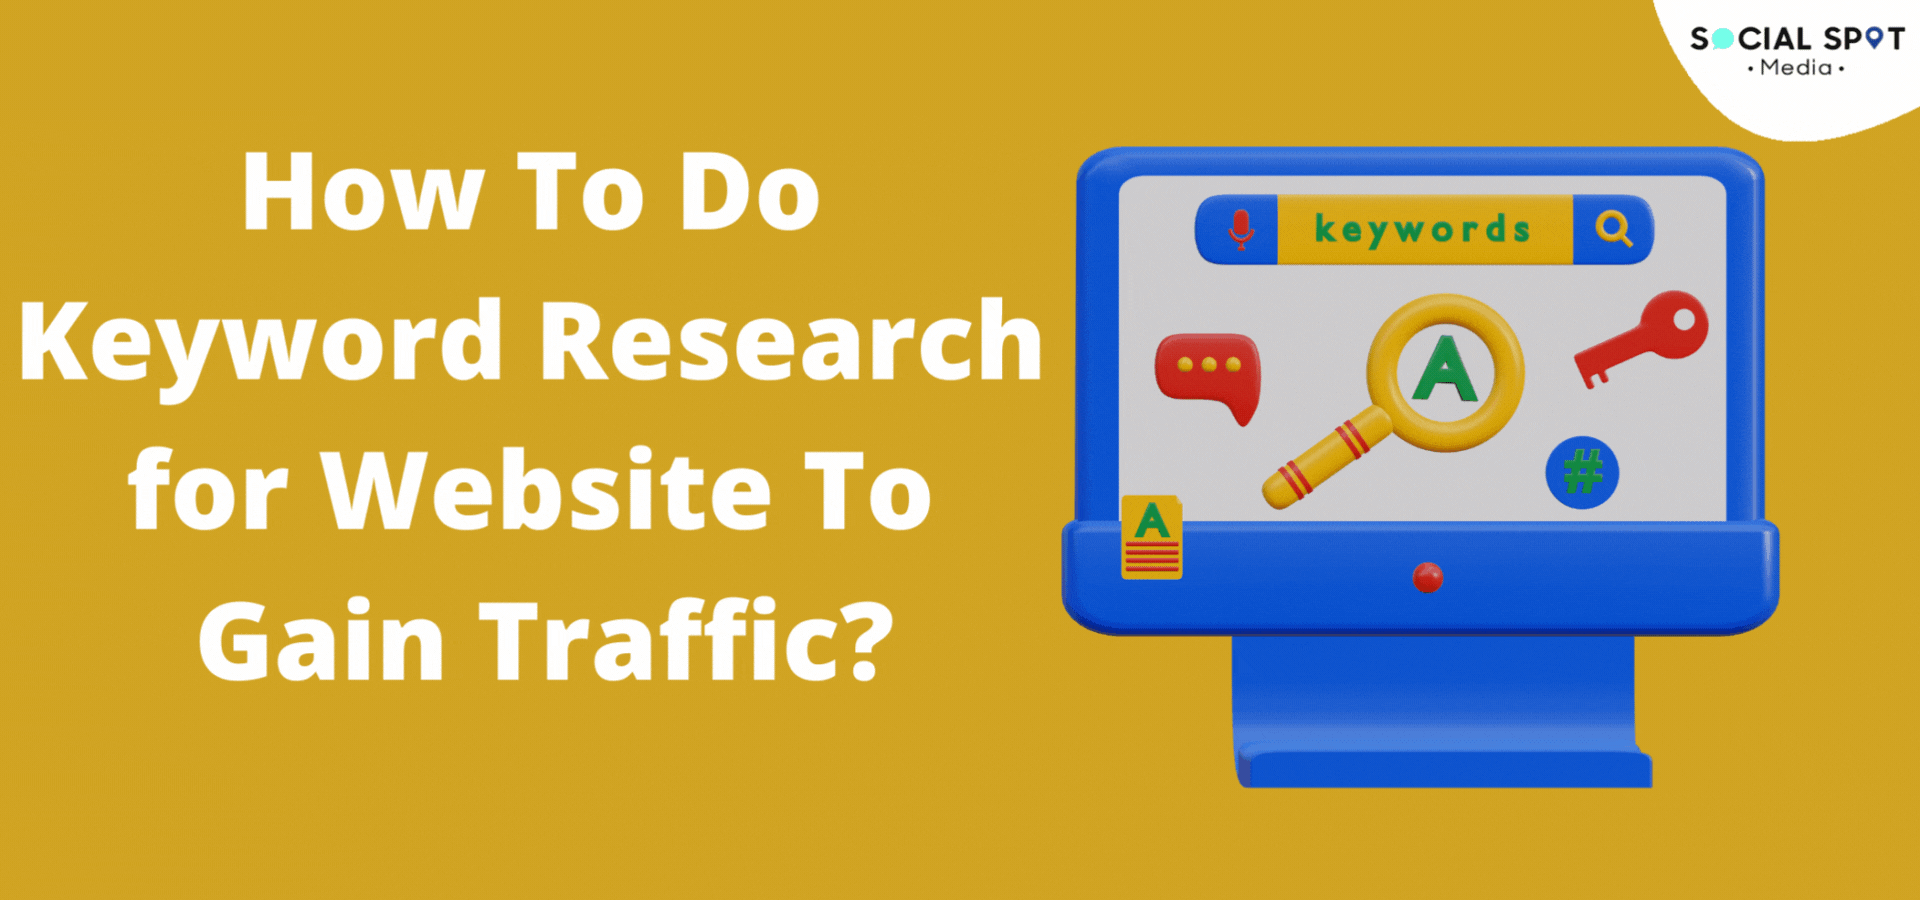 How To Do Keyword Research for Website To Gain Traffic?